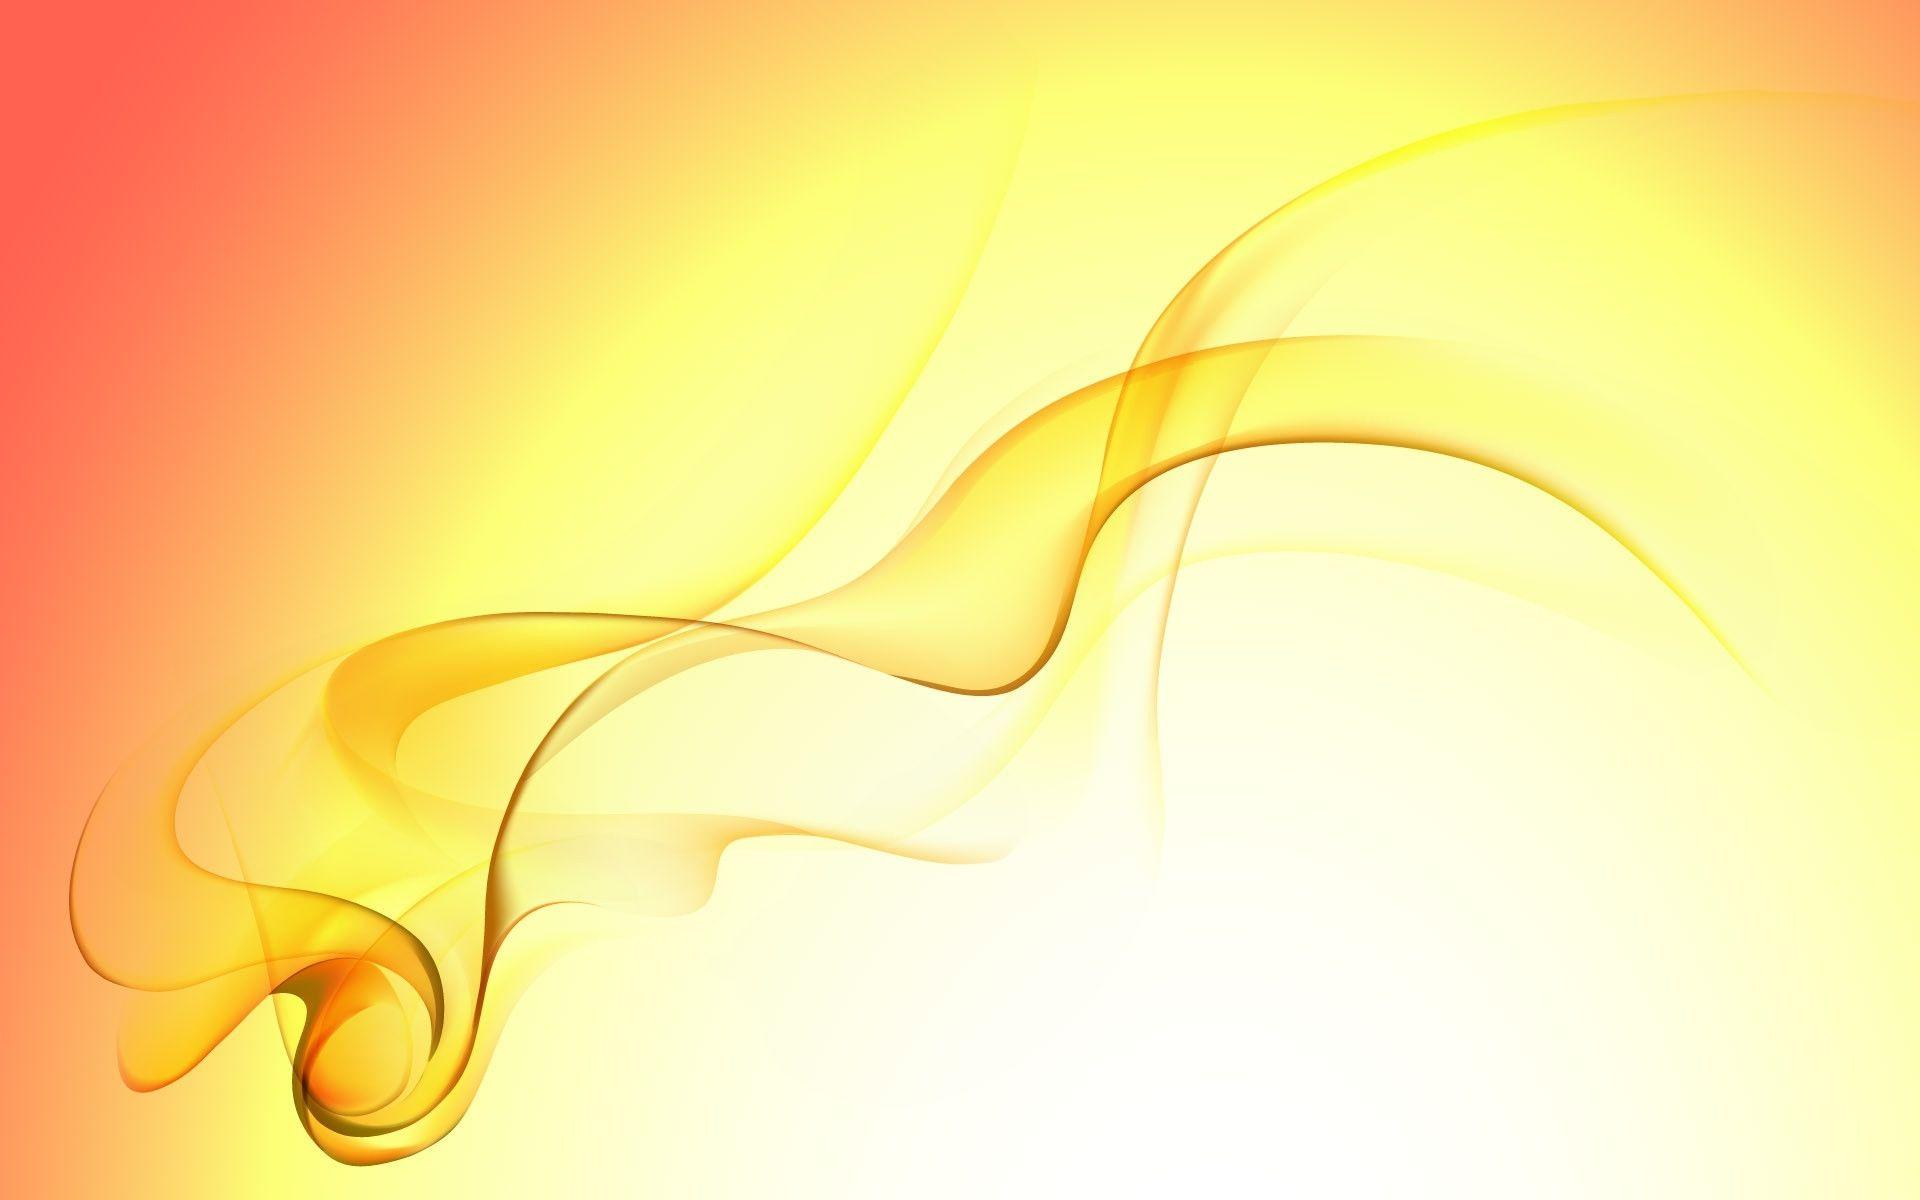 Download Cool Yellow Wallpaper 9095 1920x1200 px High Resolution